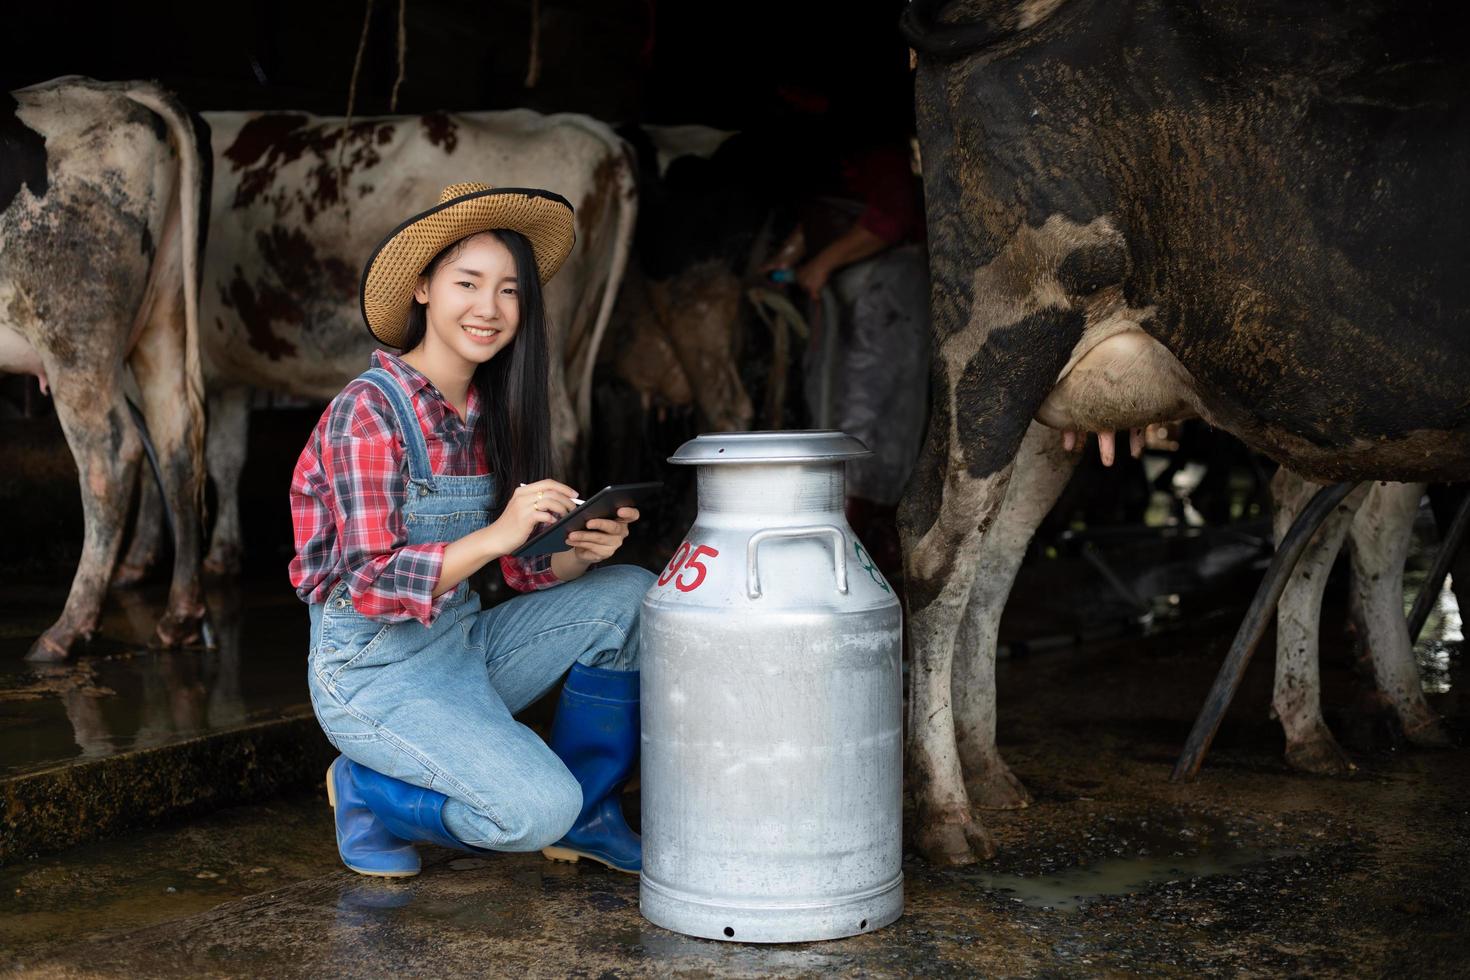 Asian women farming and agriculture industry and animal husbandry concept - young women or farmer with tablet pc computer and cows in cowshed on dairy farm with cow milking machines photo